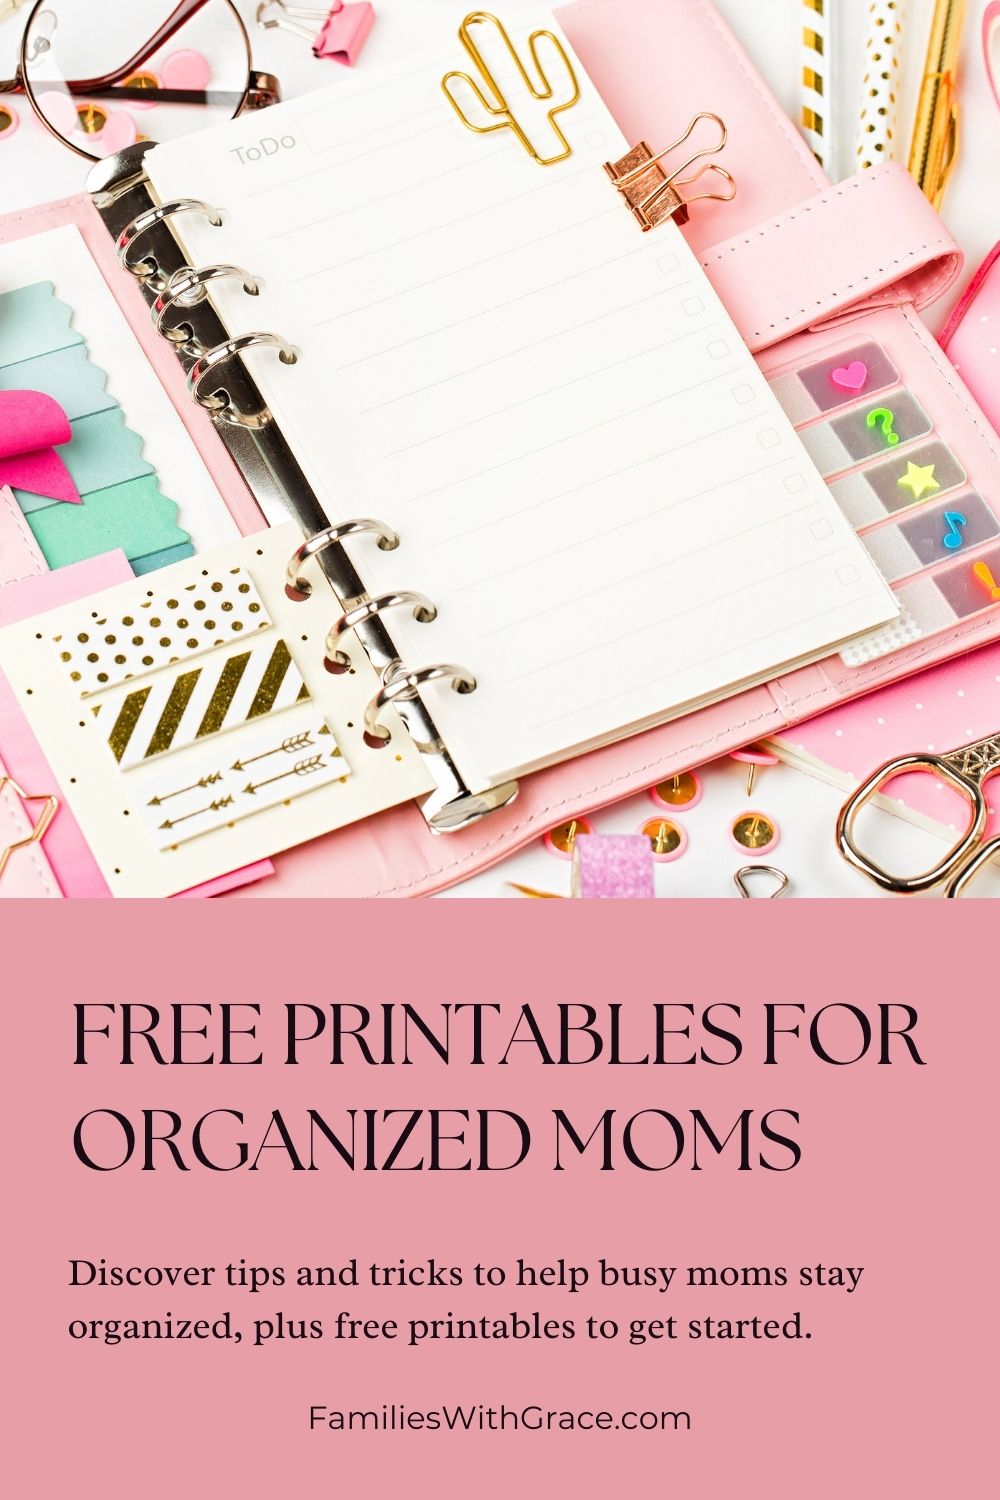 How to be a more organized mom with free printables